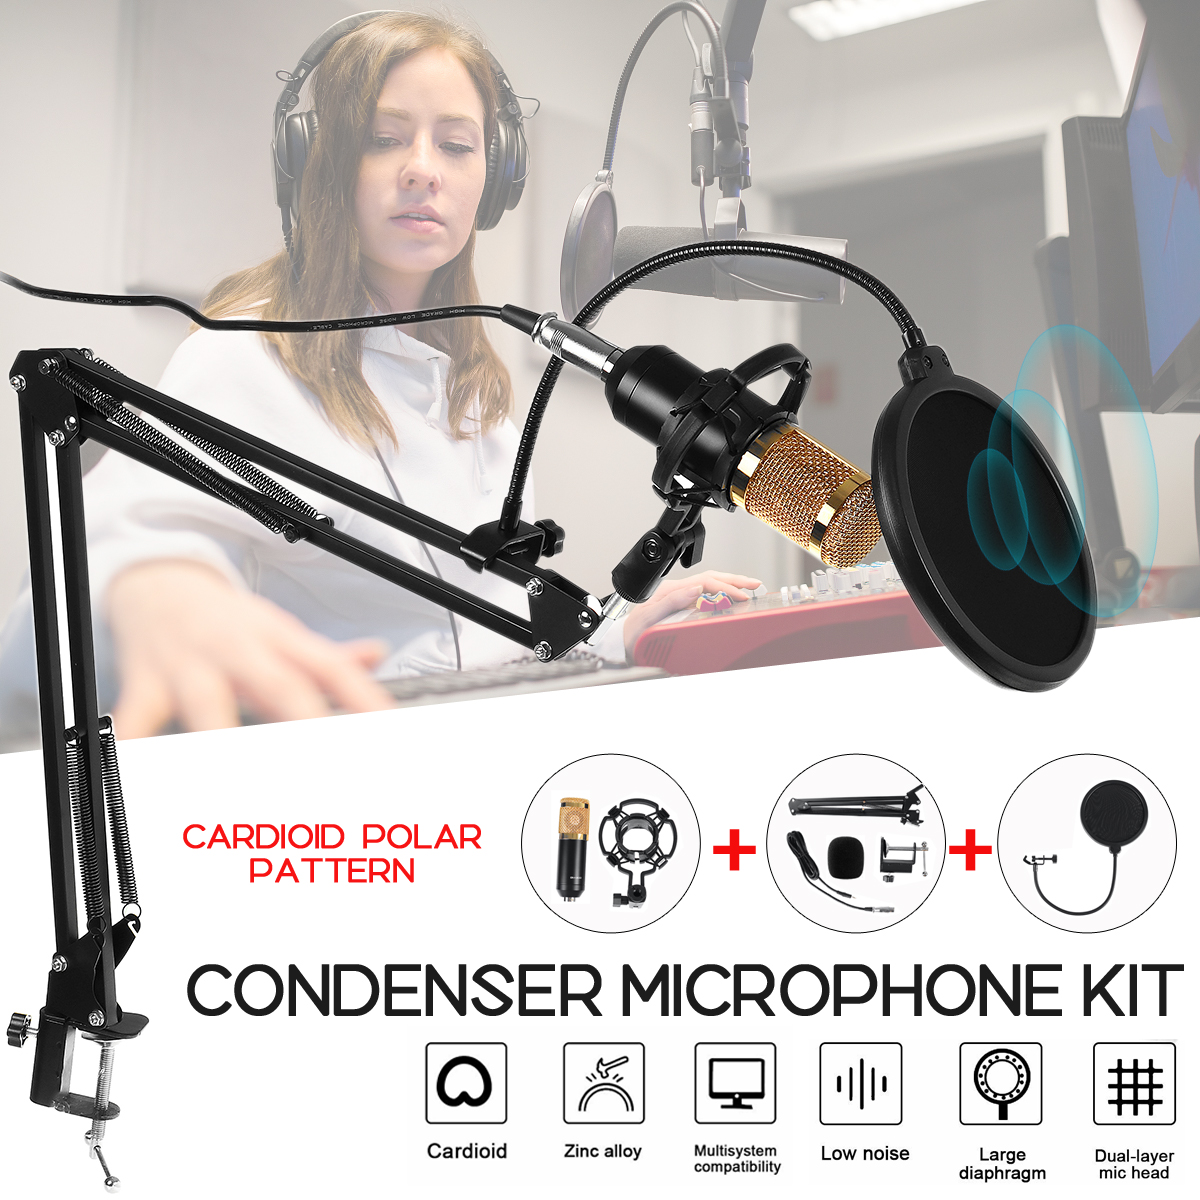 BM-800-Condenser-Microphone-Kit-35mm-Recording-Mic-Tripod-Stand-Set-for-Computer-PC-Karaoke-for-Chat-1736977-1